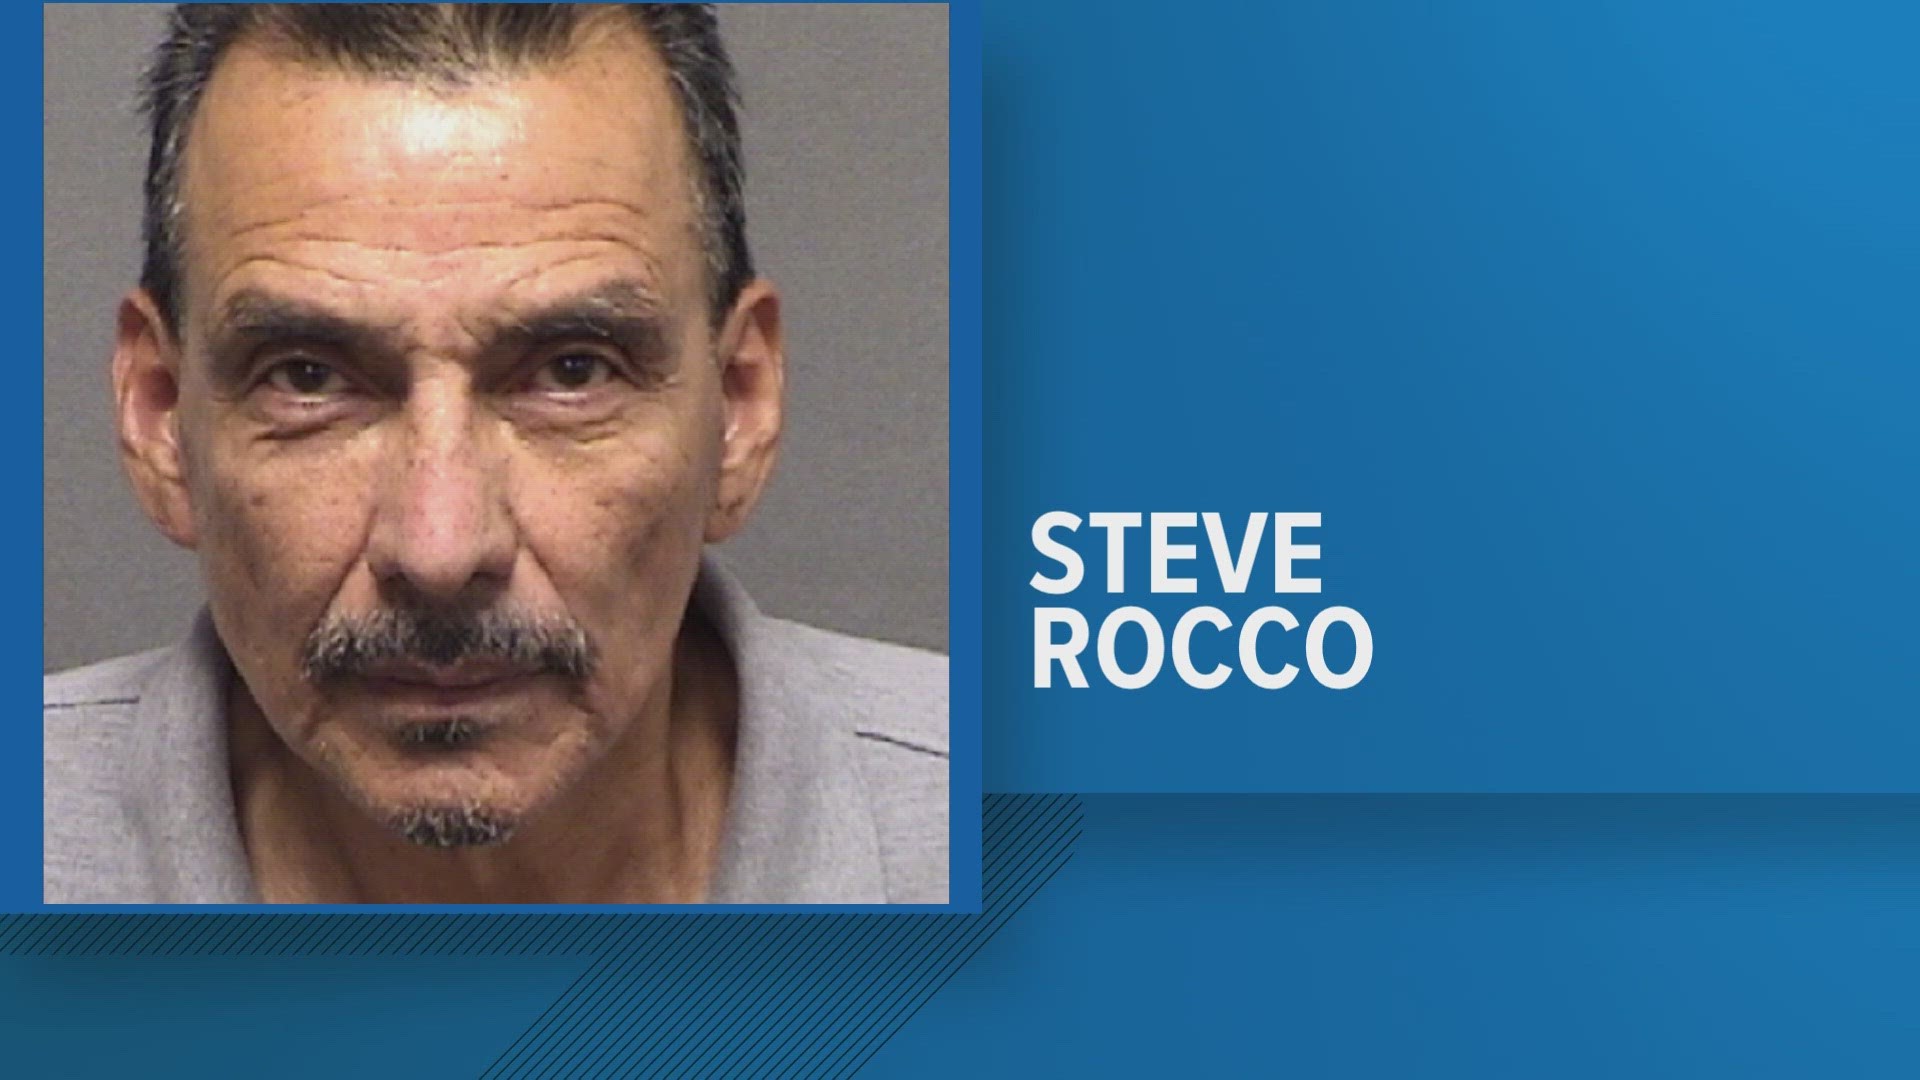 Police say Steve Rocco is behind bars.